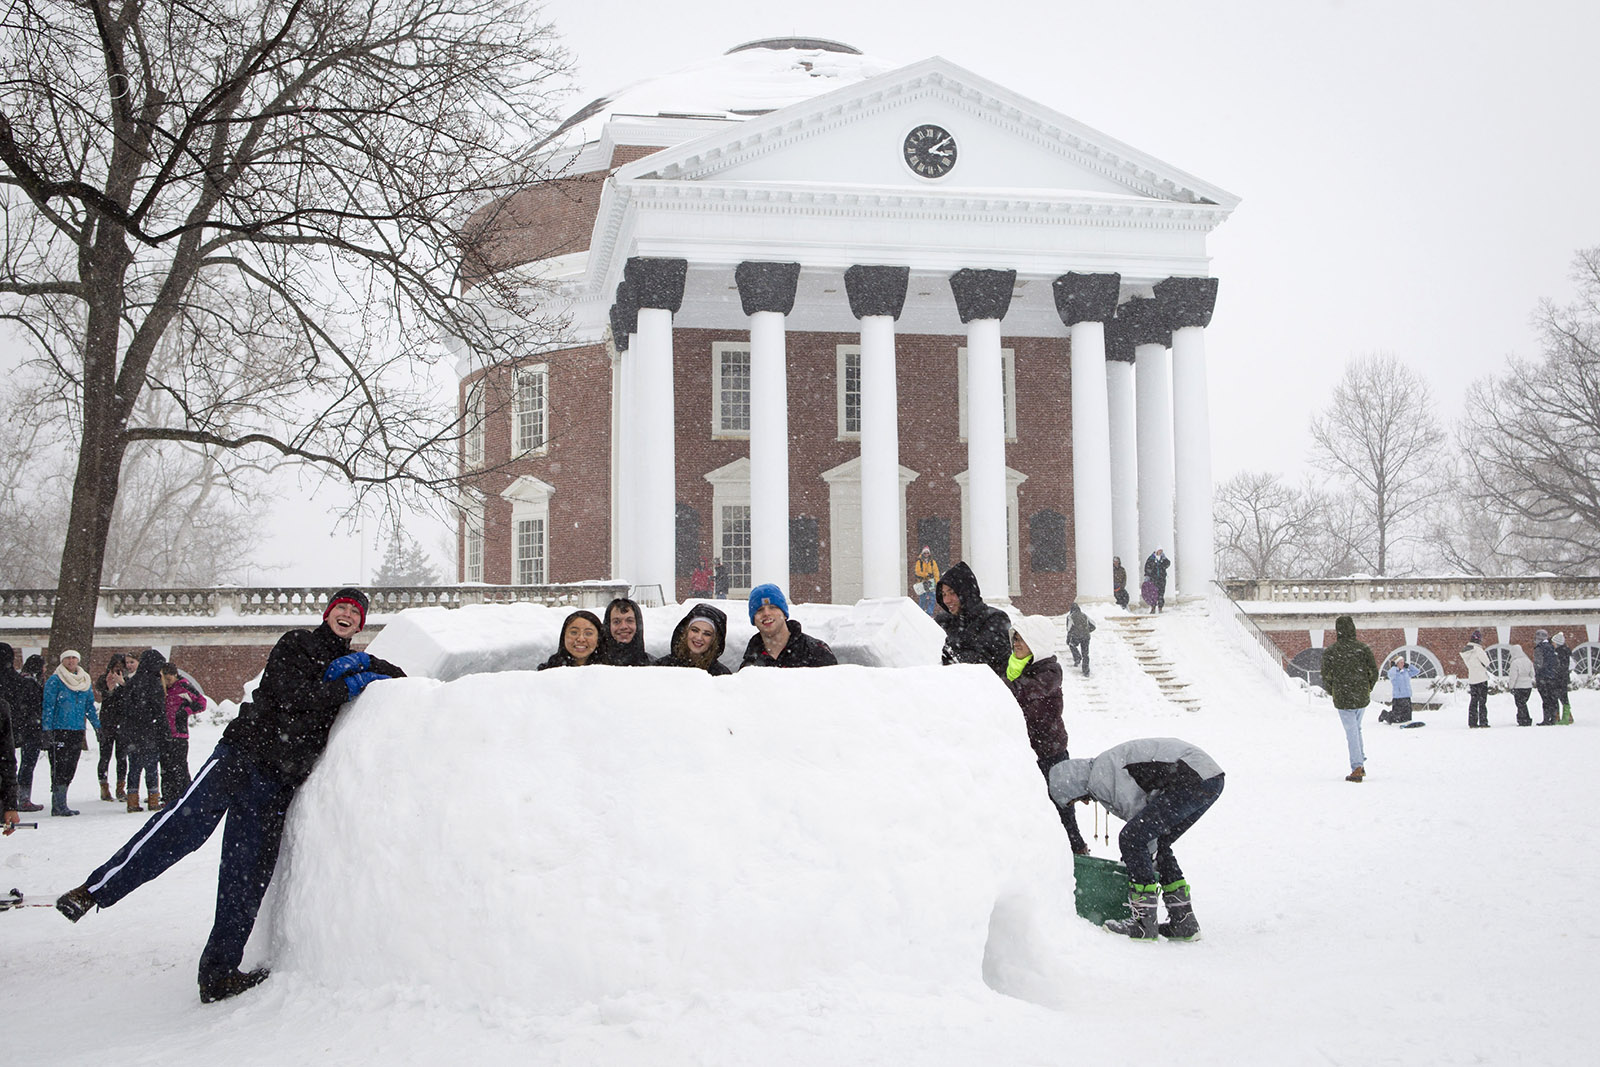 Students creating a snow fort in front of the Rotunda